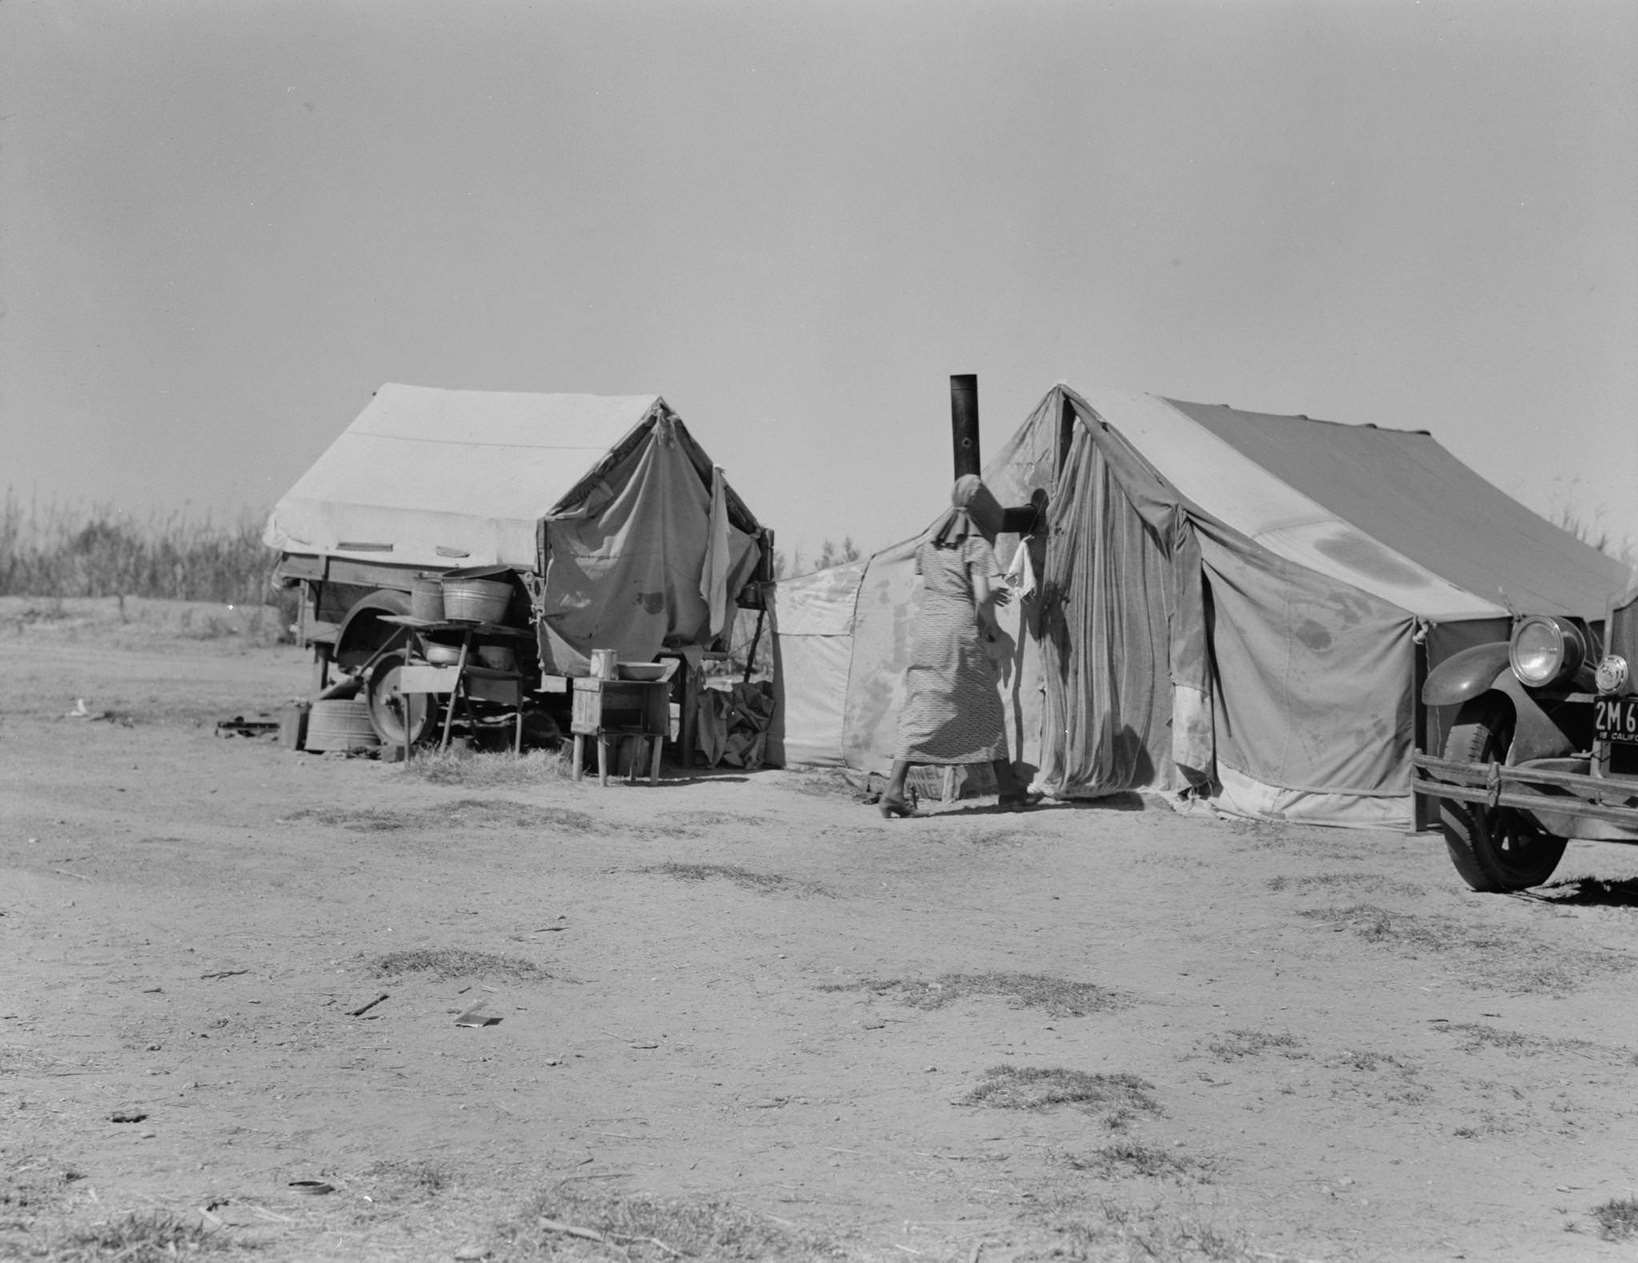 Home of a dust bowl refugee in California, 1932